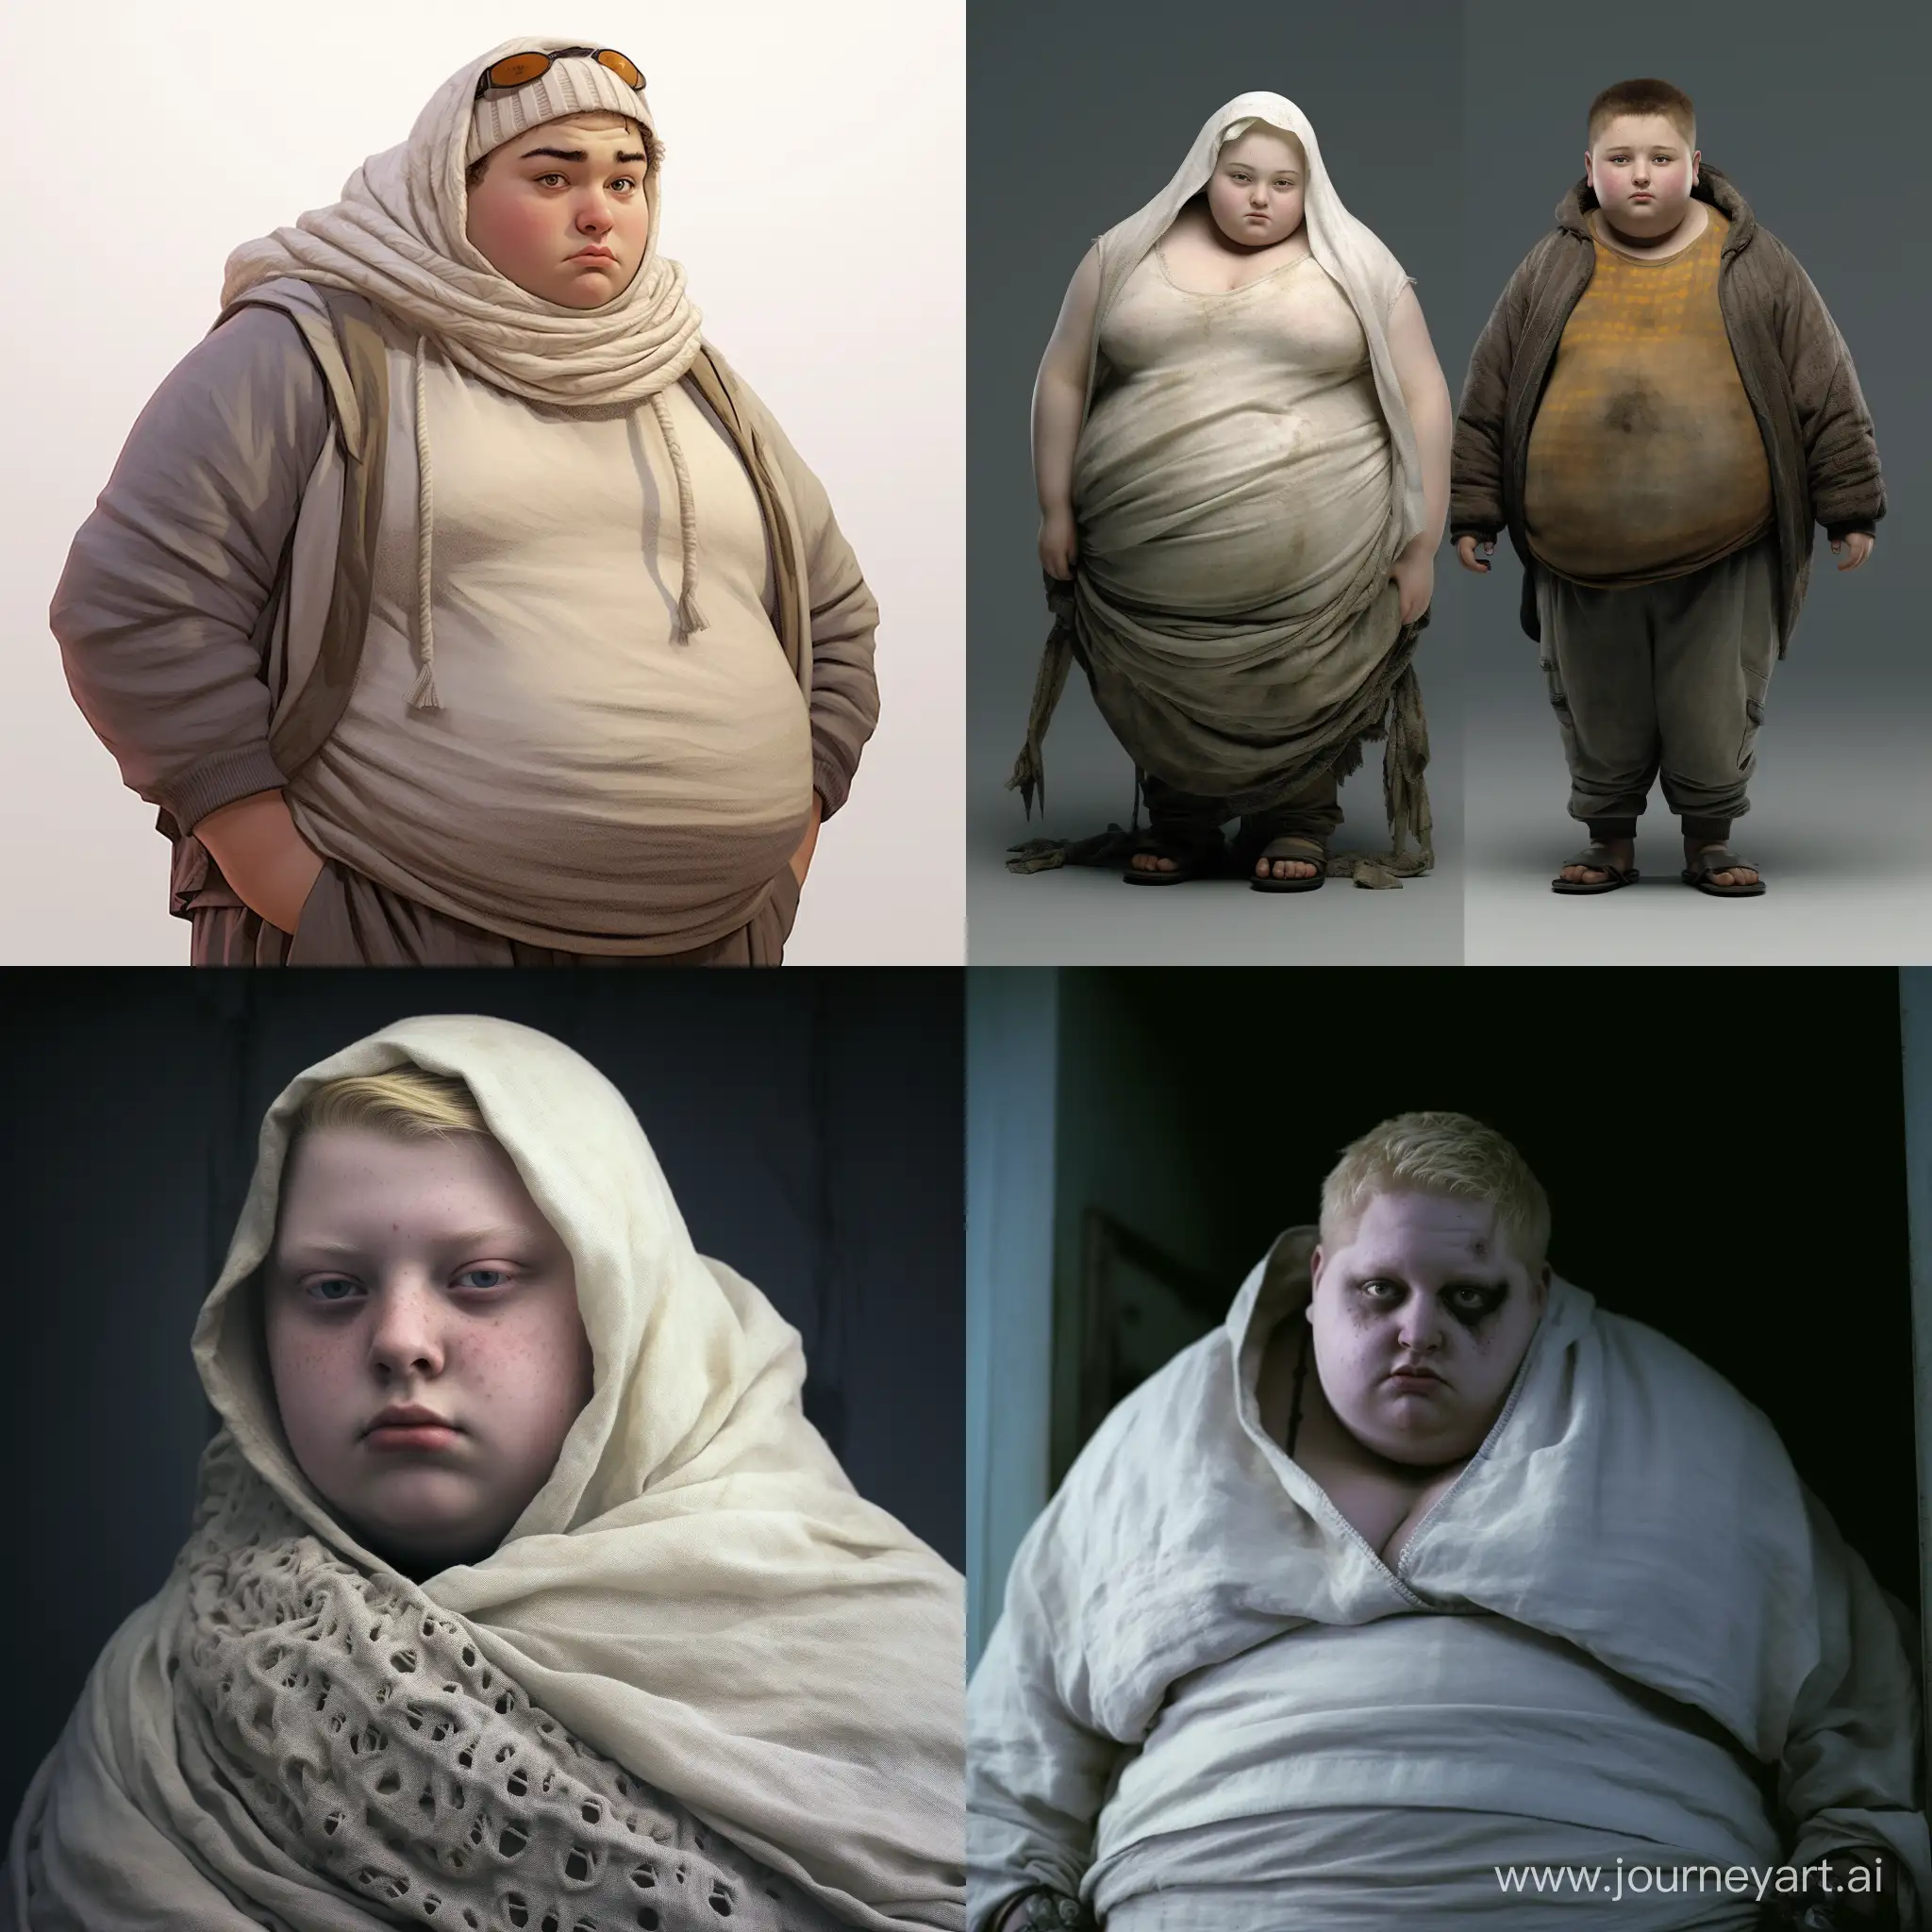  A white skin boy called fouladi that has overweight with a gray hoodi 